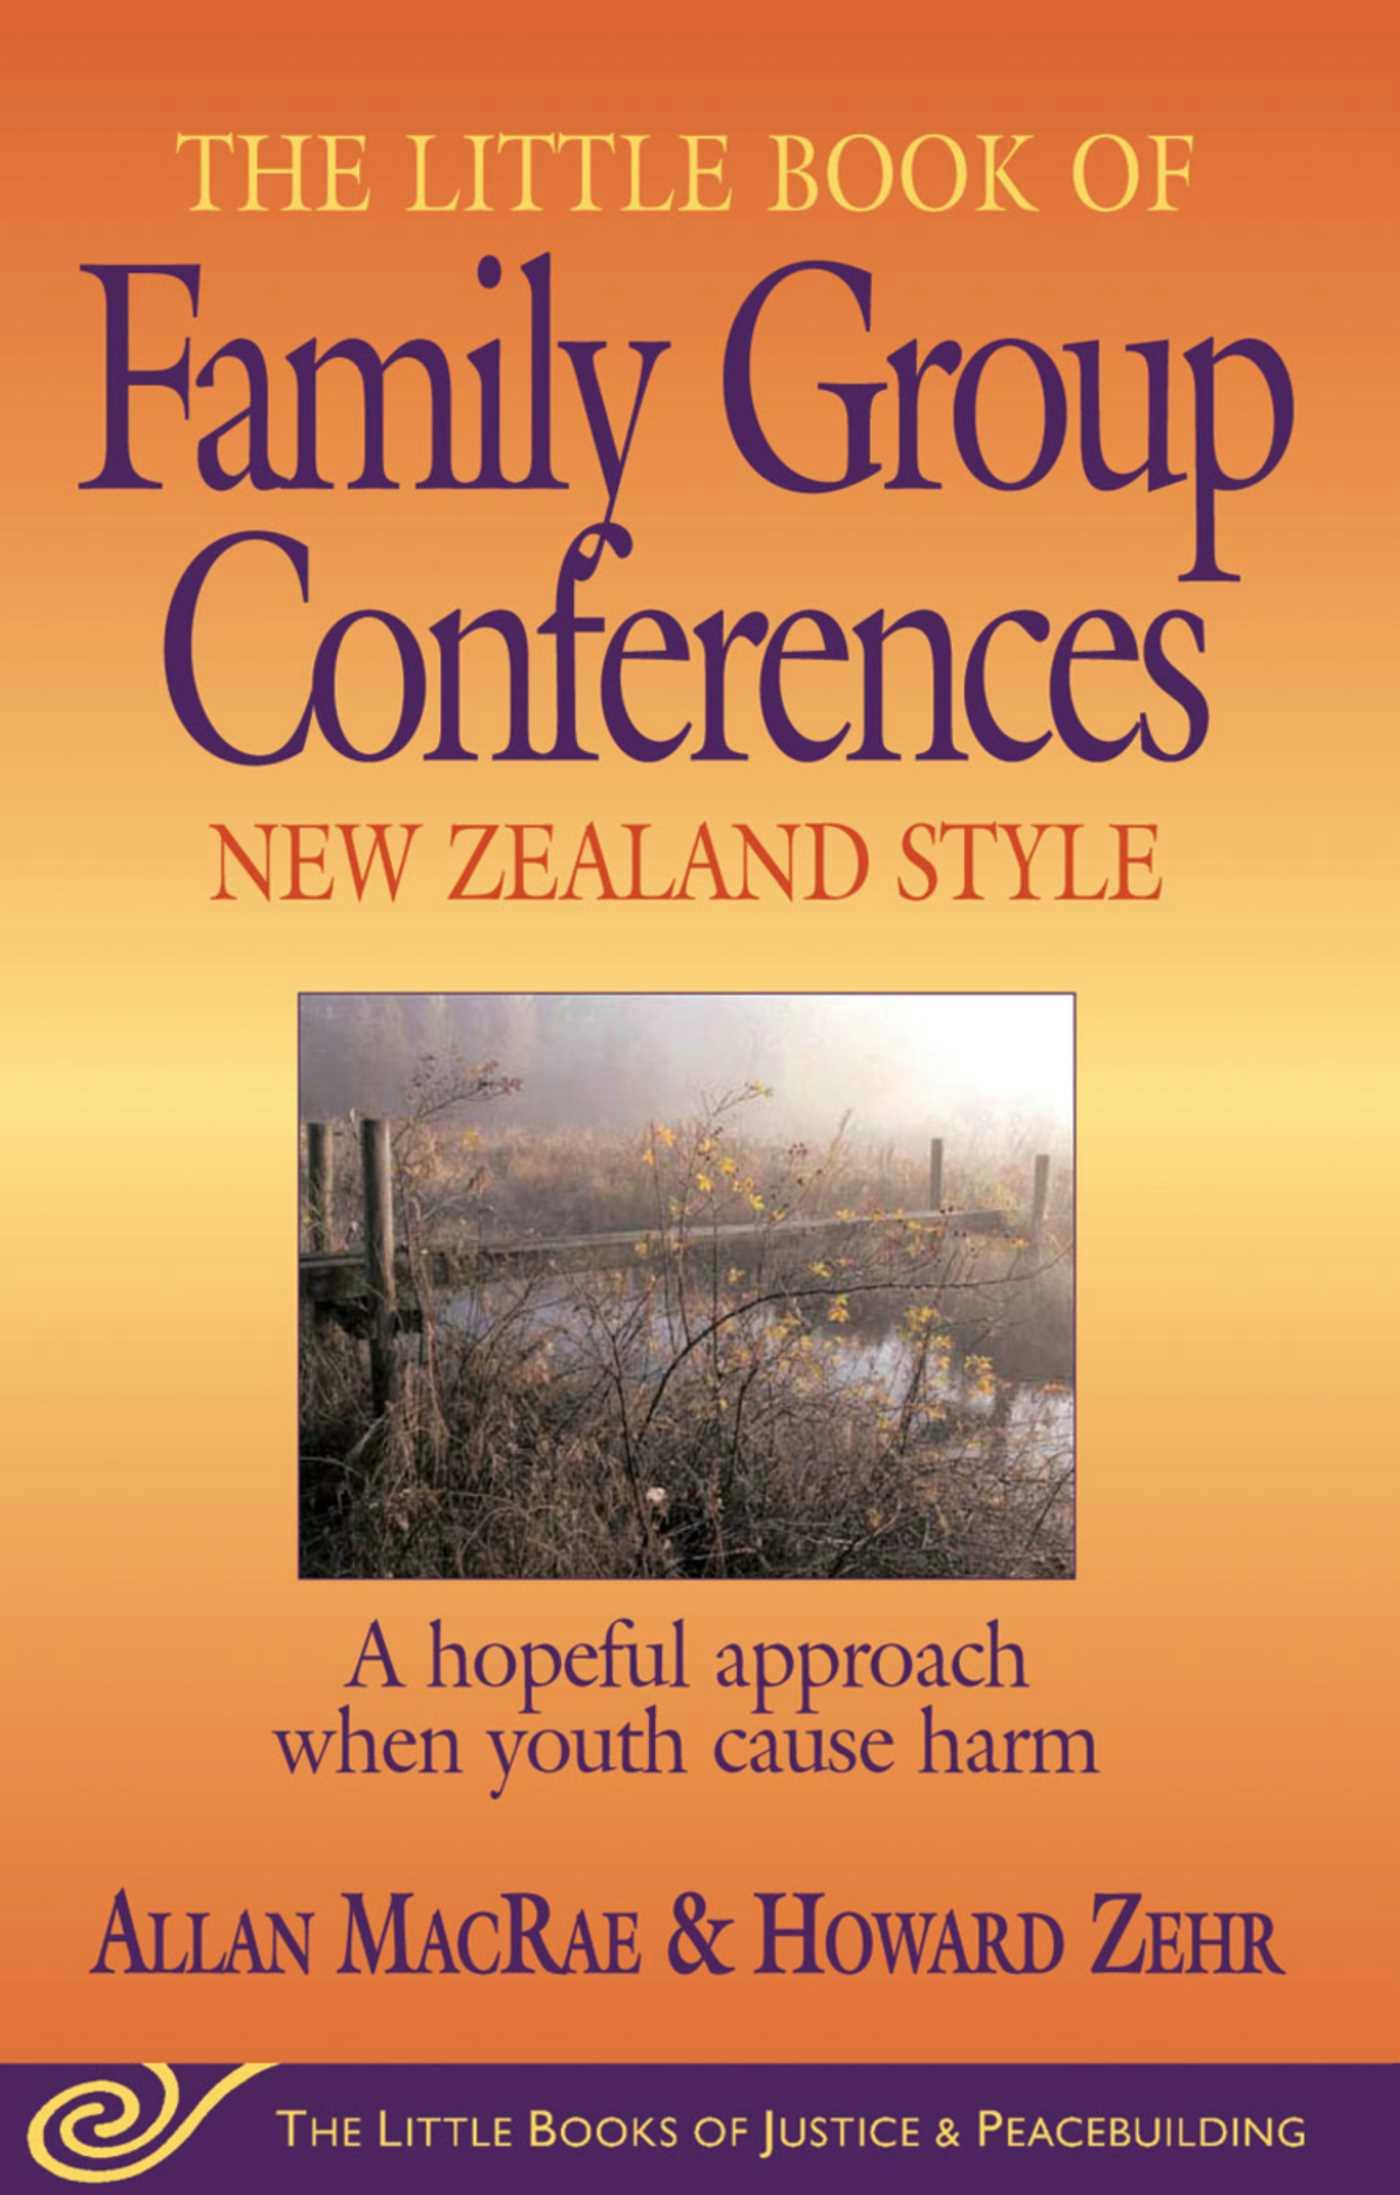 Little Book of Family Group Conferences New Zealand Style: A Hopeful Approach When Youth Cause Harm - Allan MacRae